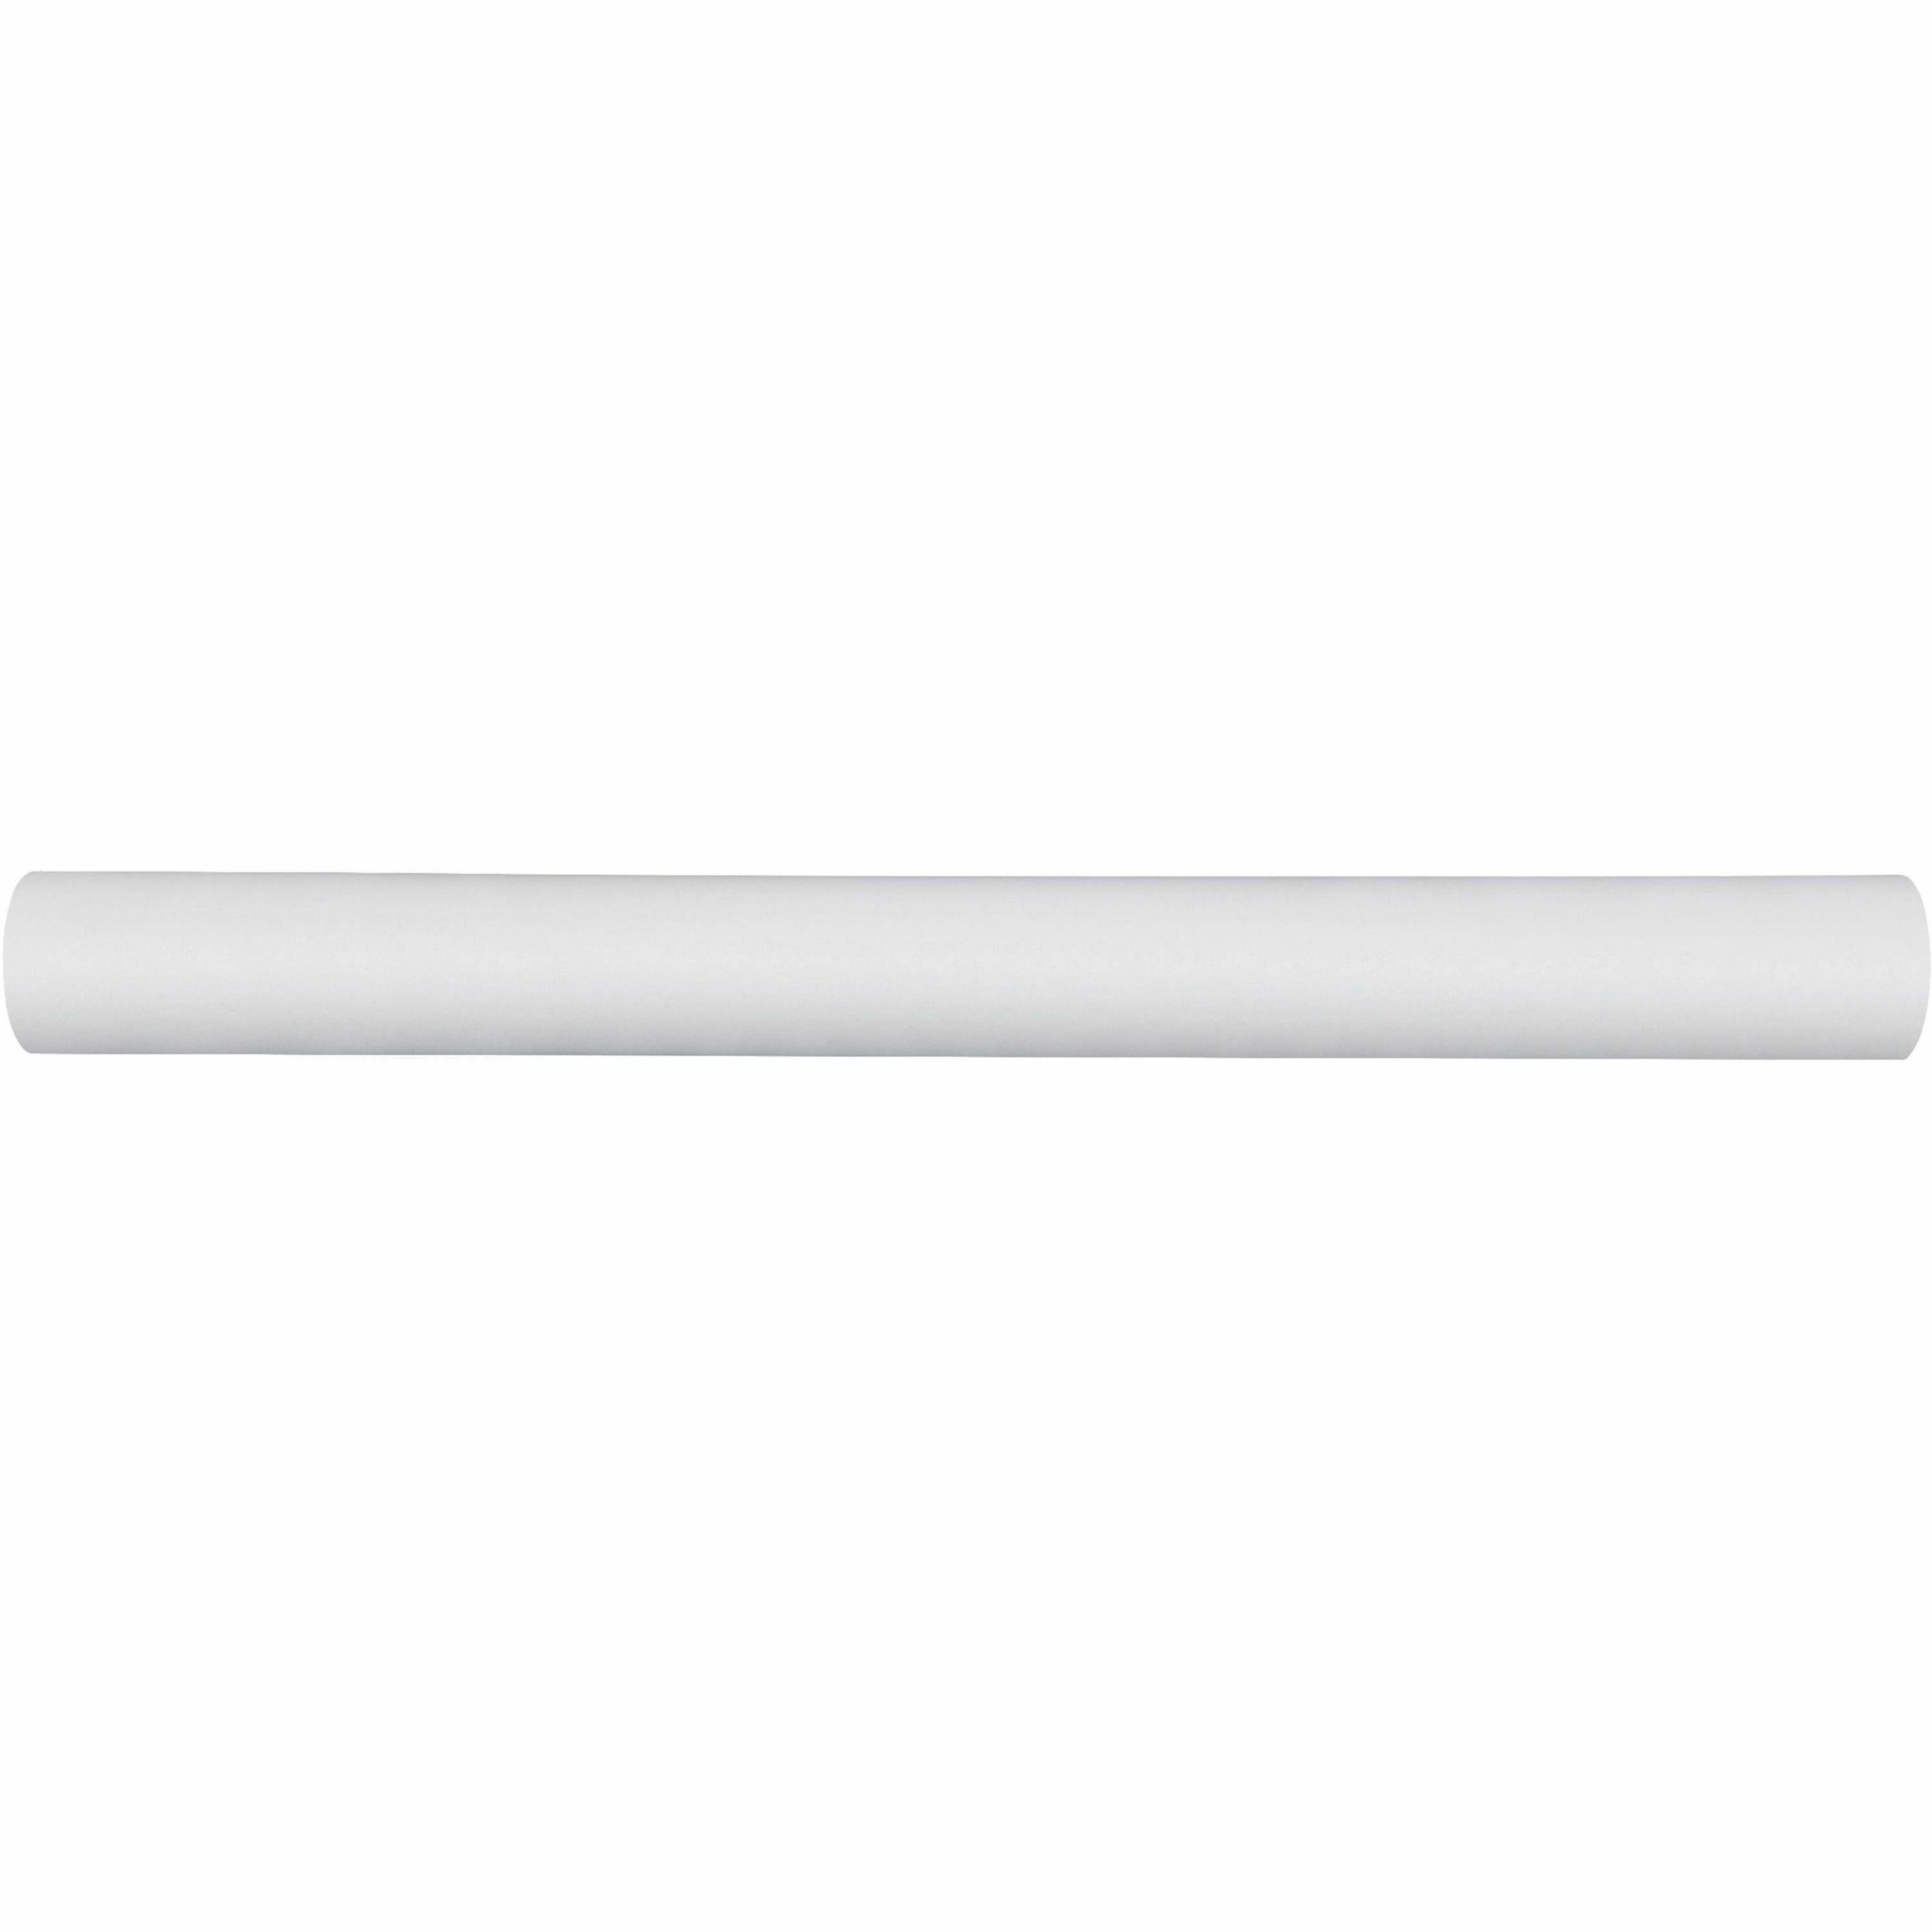 GoWrite! Dry Erase Roll - Dry-erase, Self-adhesive - White Surface - 20ft Width x 24" Length - No - 1 / Roll - 